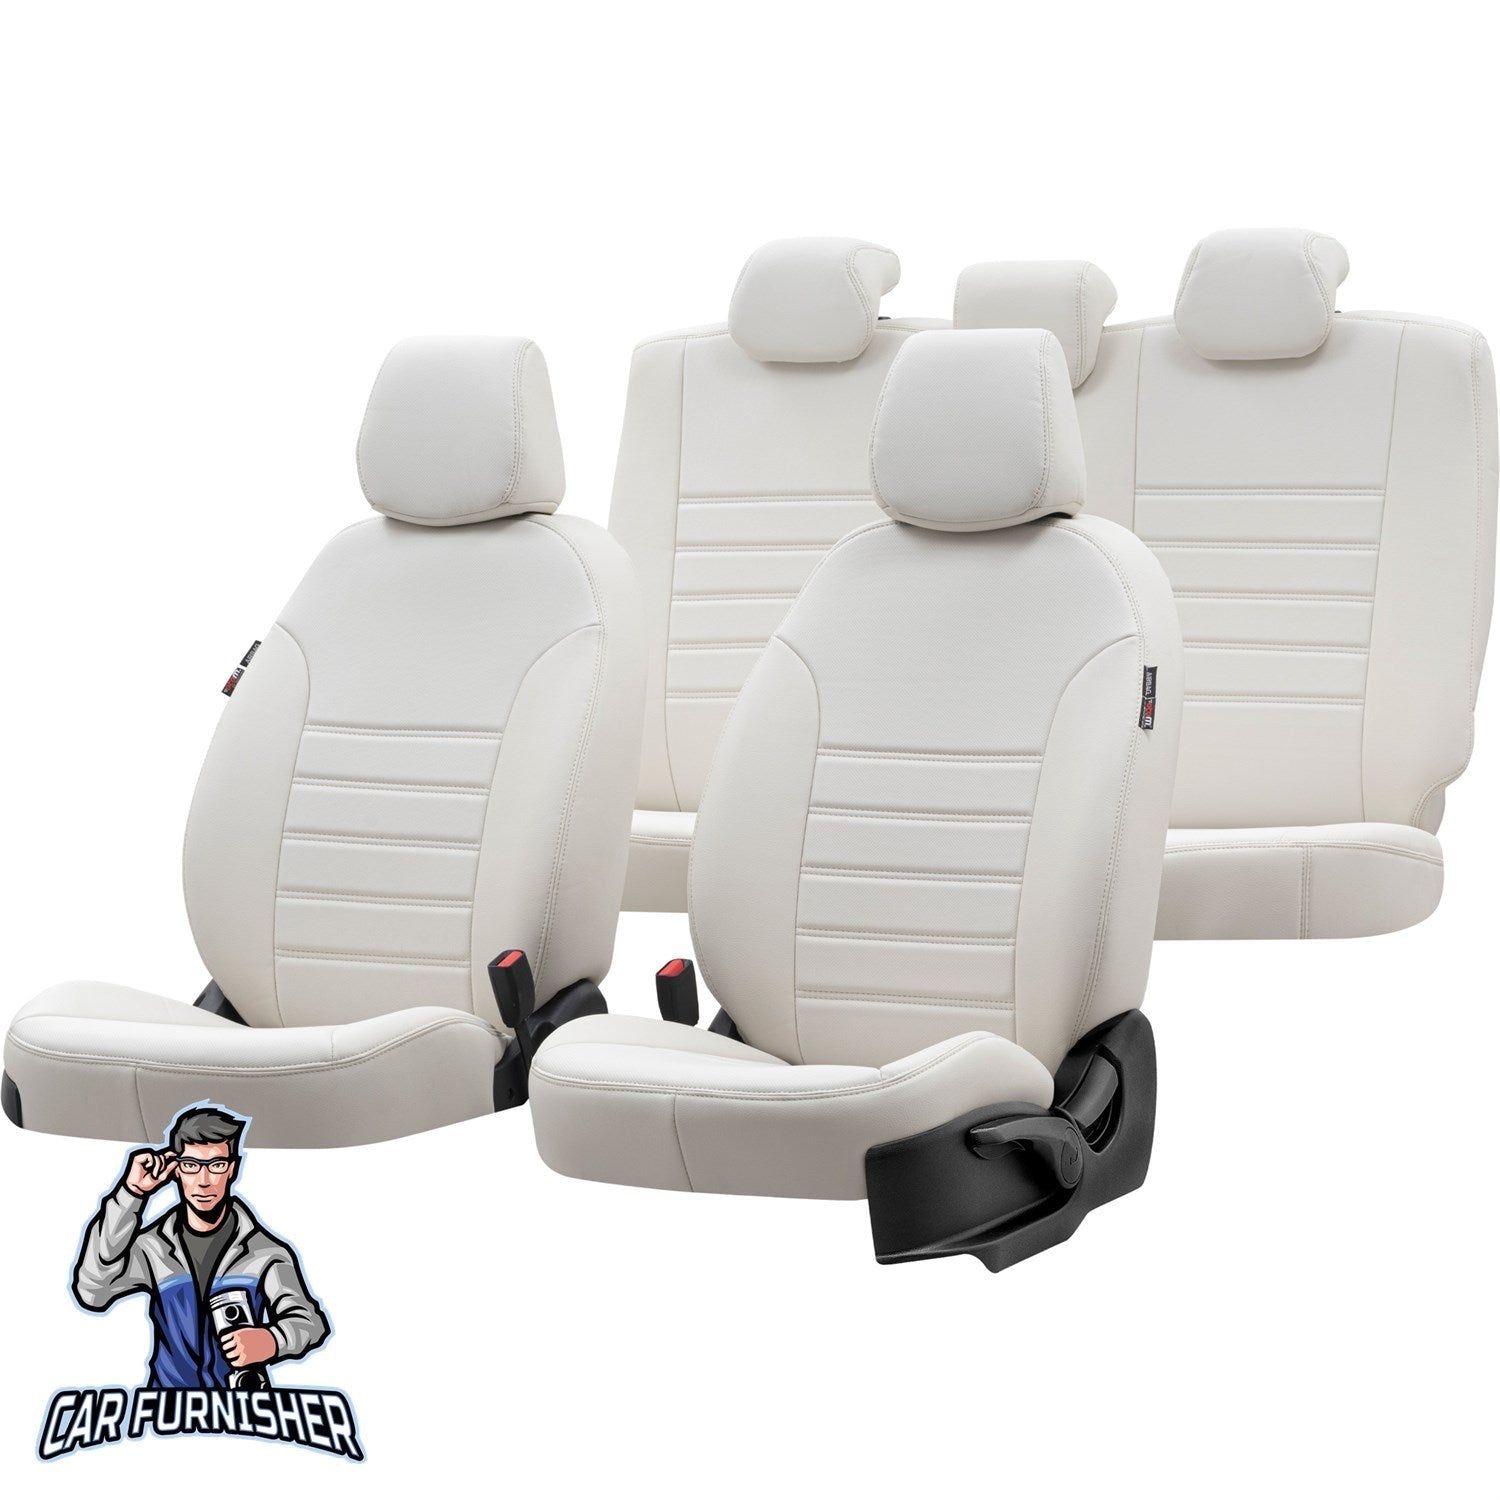 Toyota Camry Seat Cover Istanbul Leather Design Ivory Leather